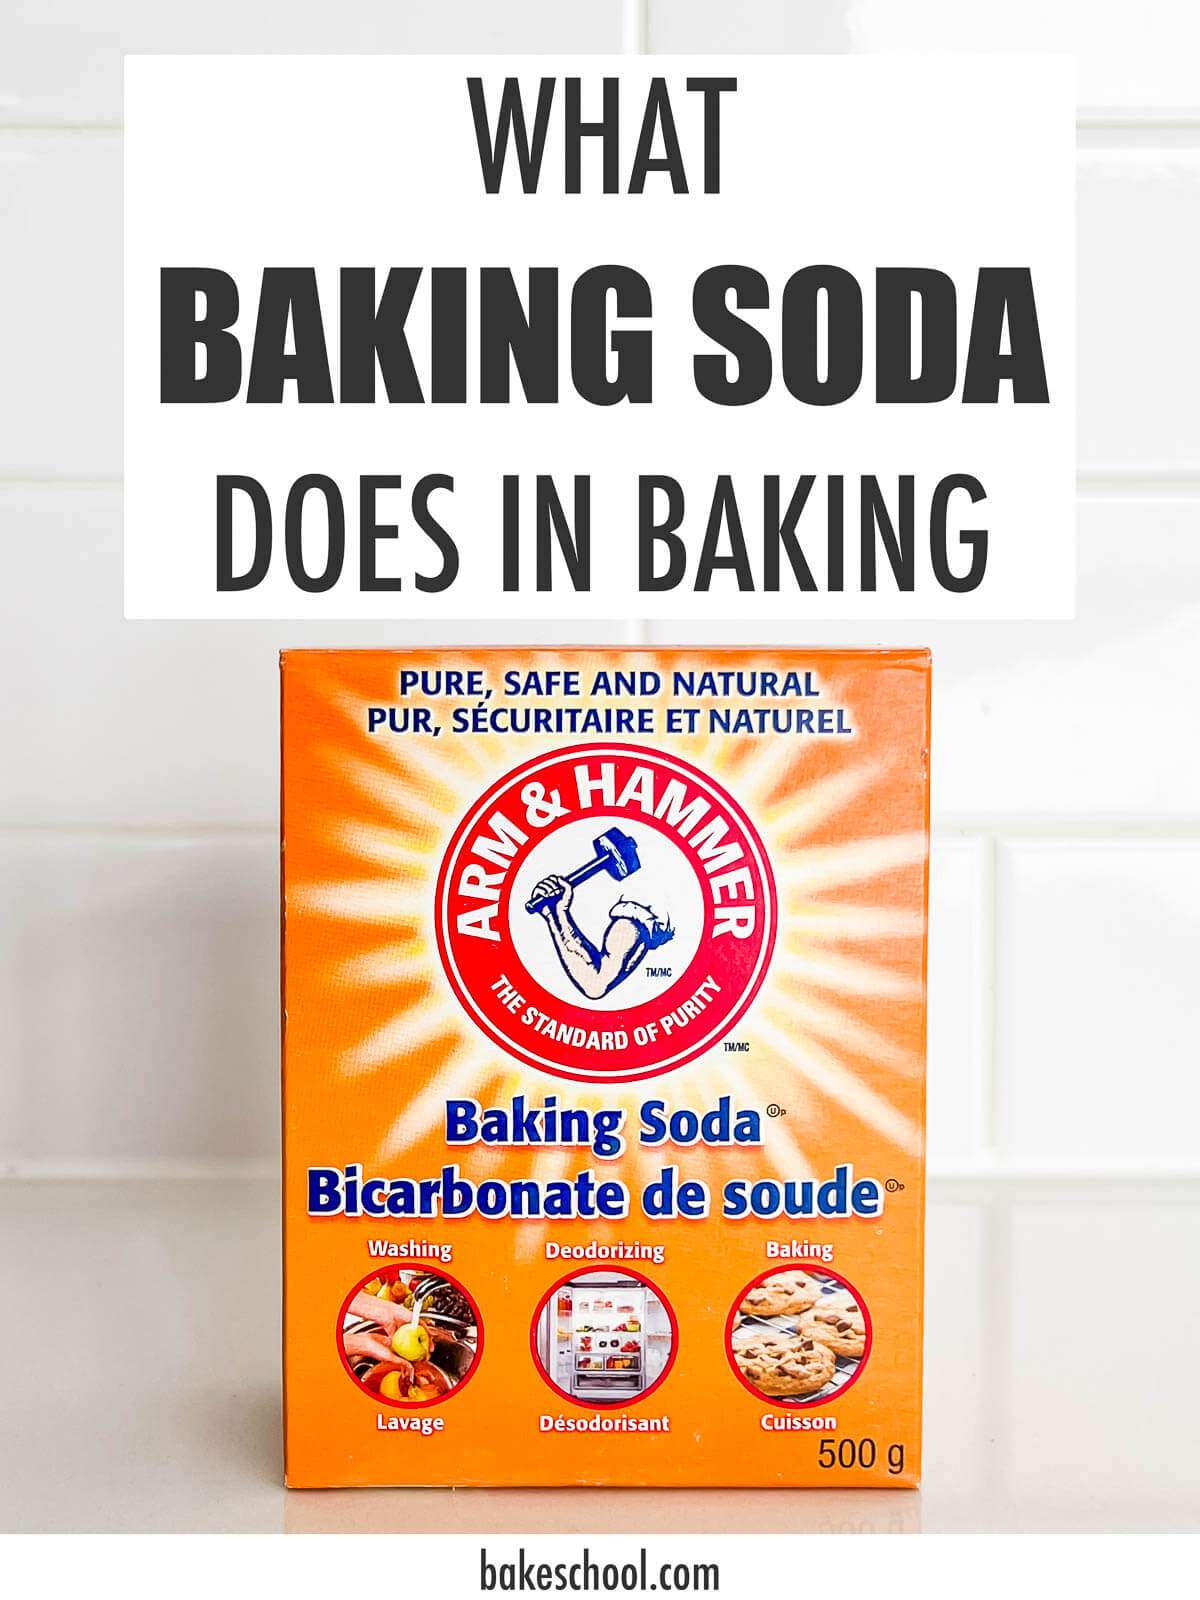 A box of Arm & Hammer baking soda on a kitchen counter with a text overlay that says "What baking soda does in baking."